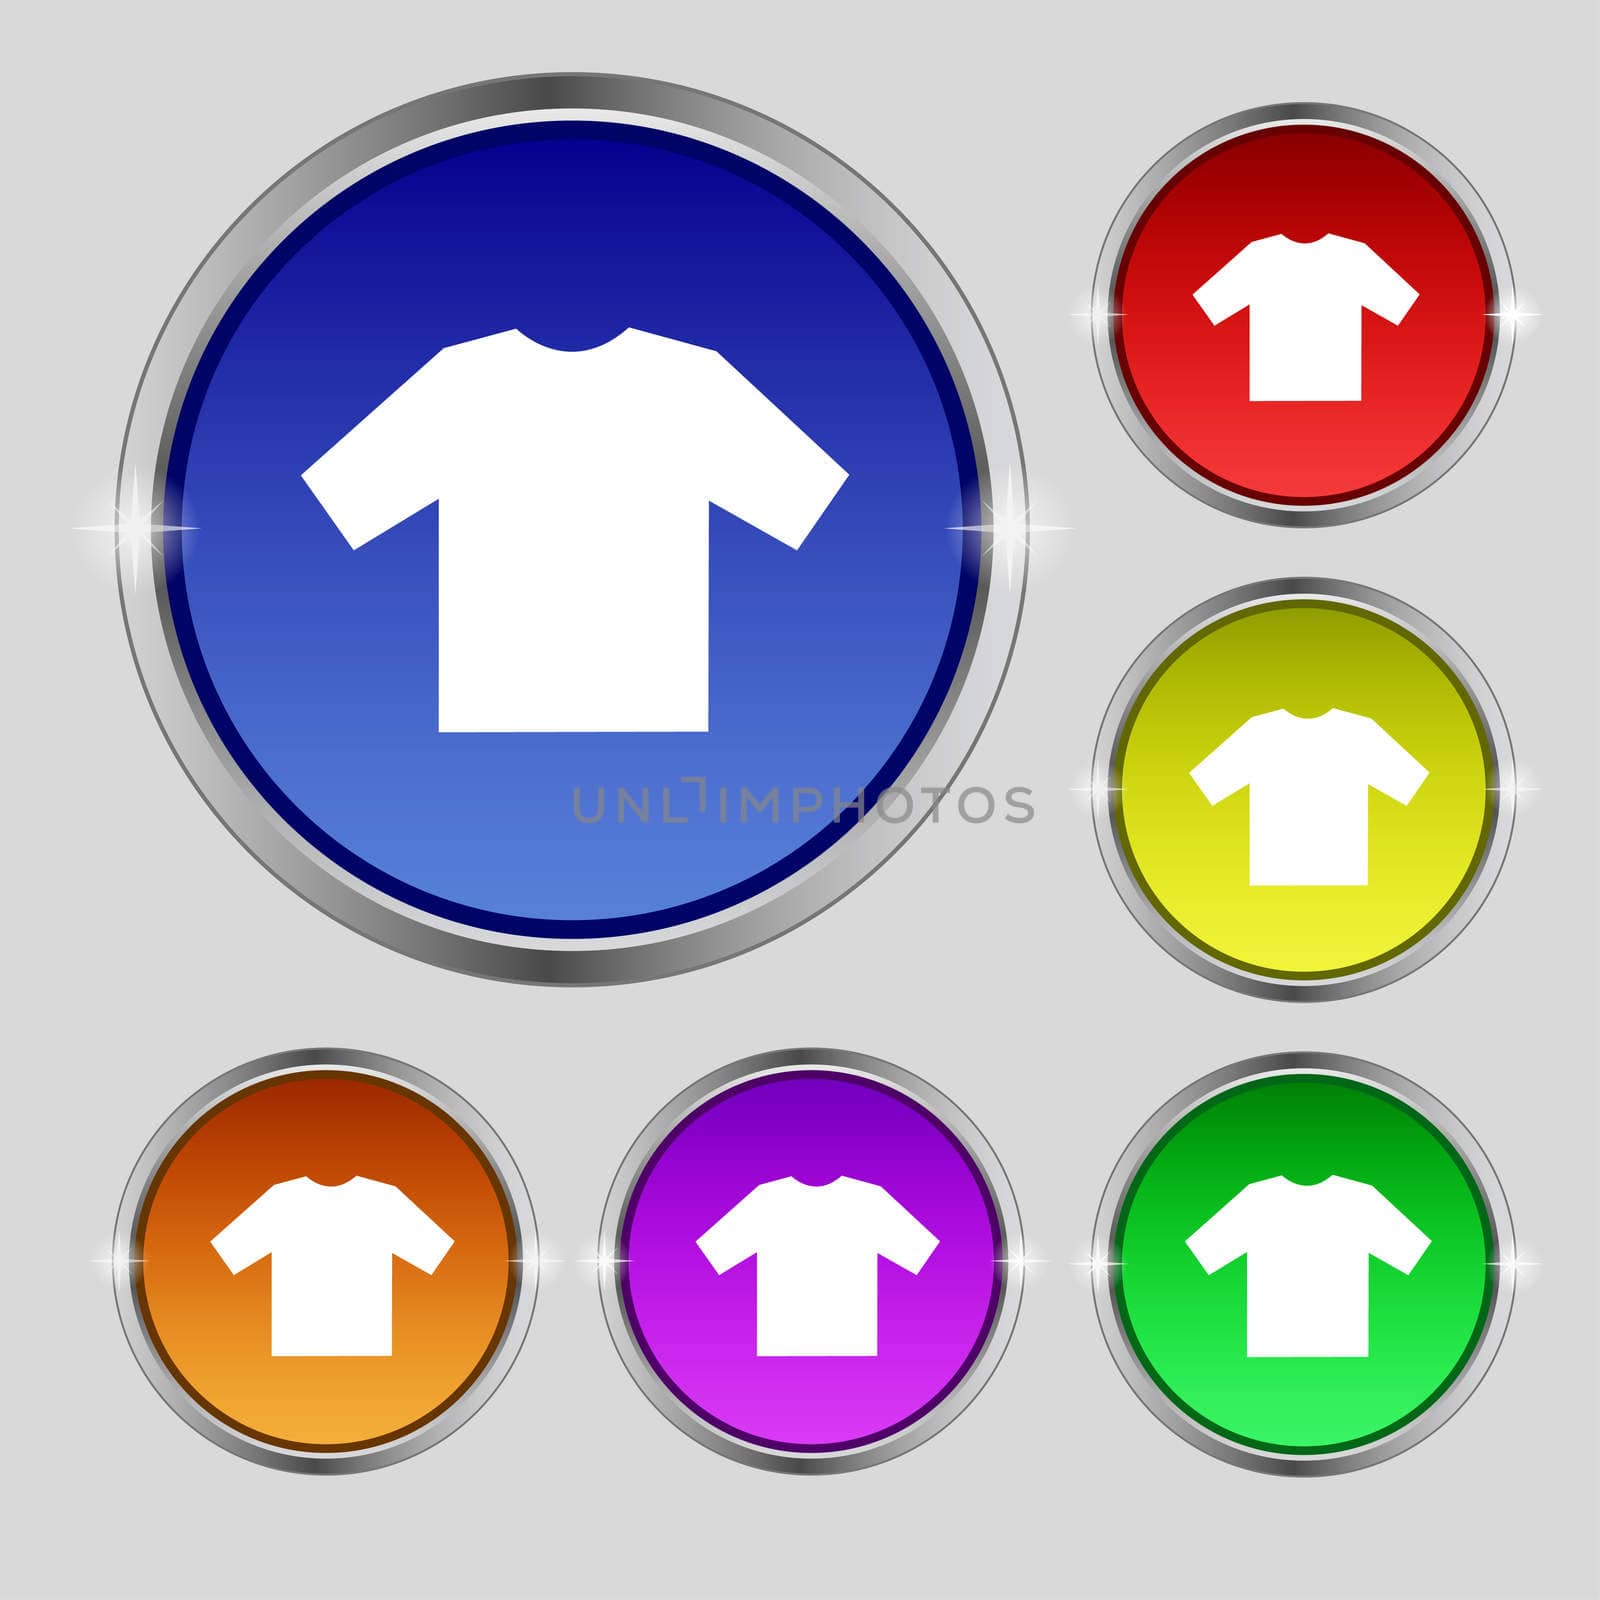 t-shirt icon sign. Round symbol on bright colourful buttons. illustration